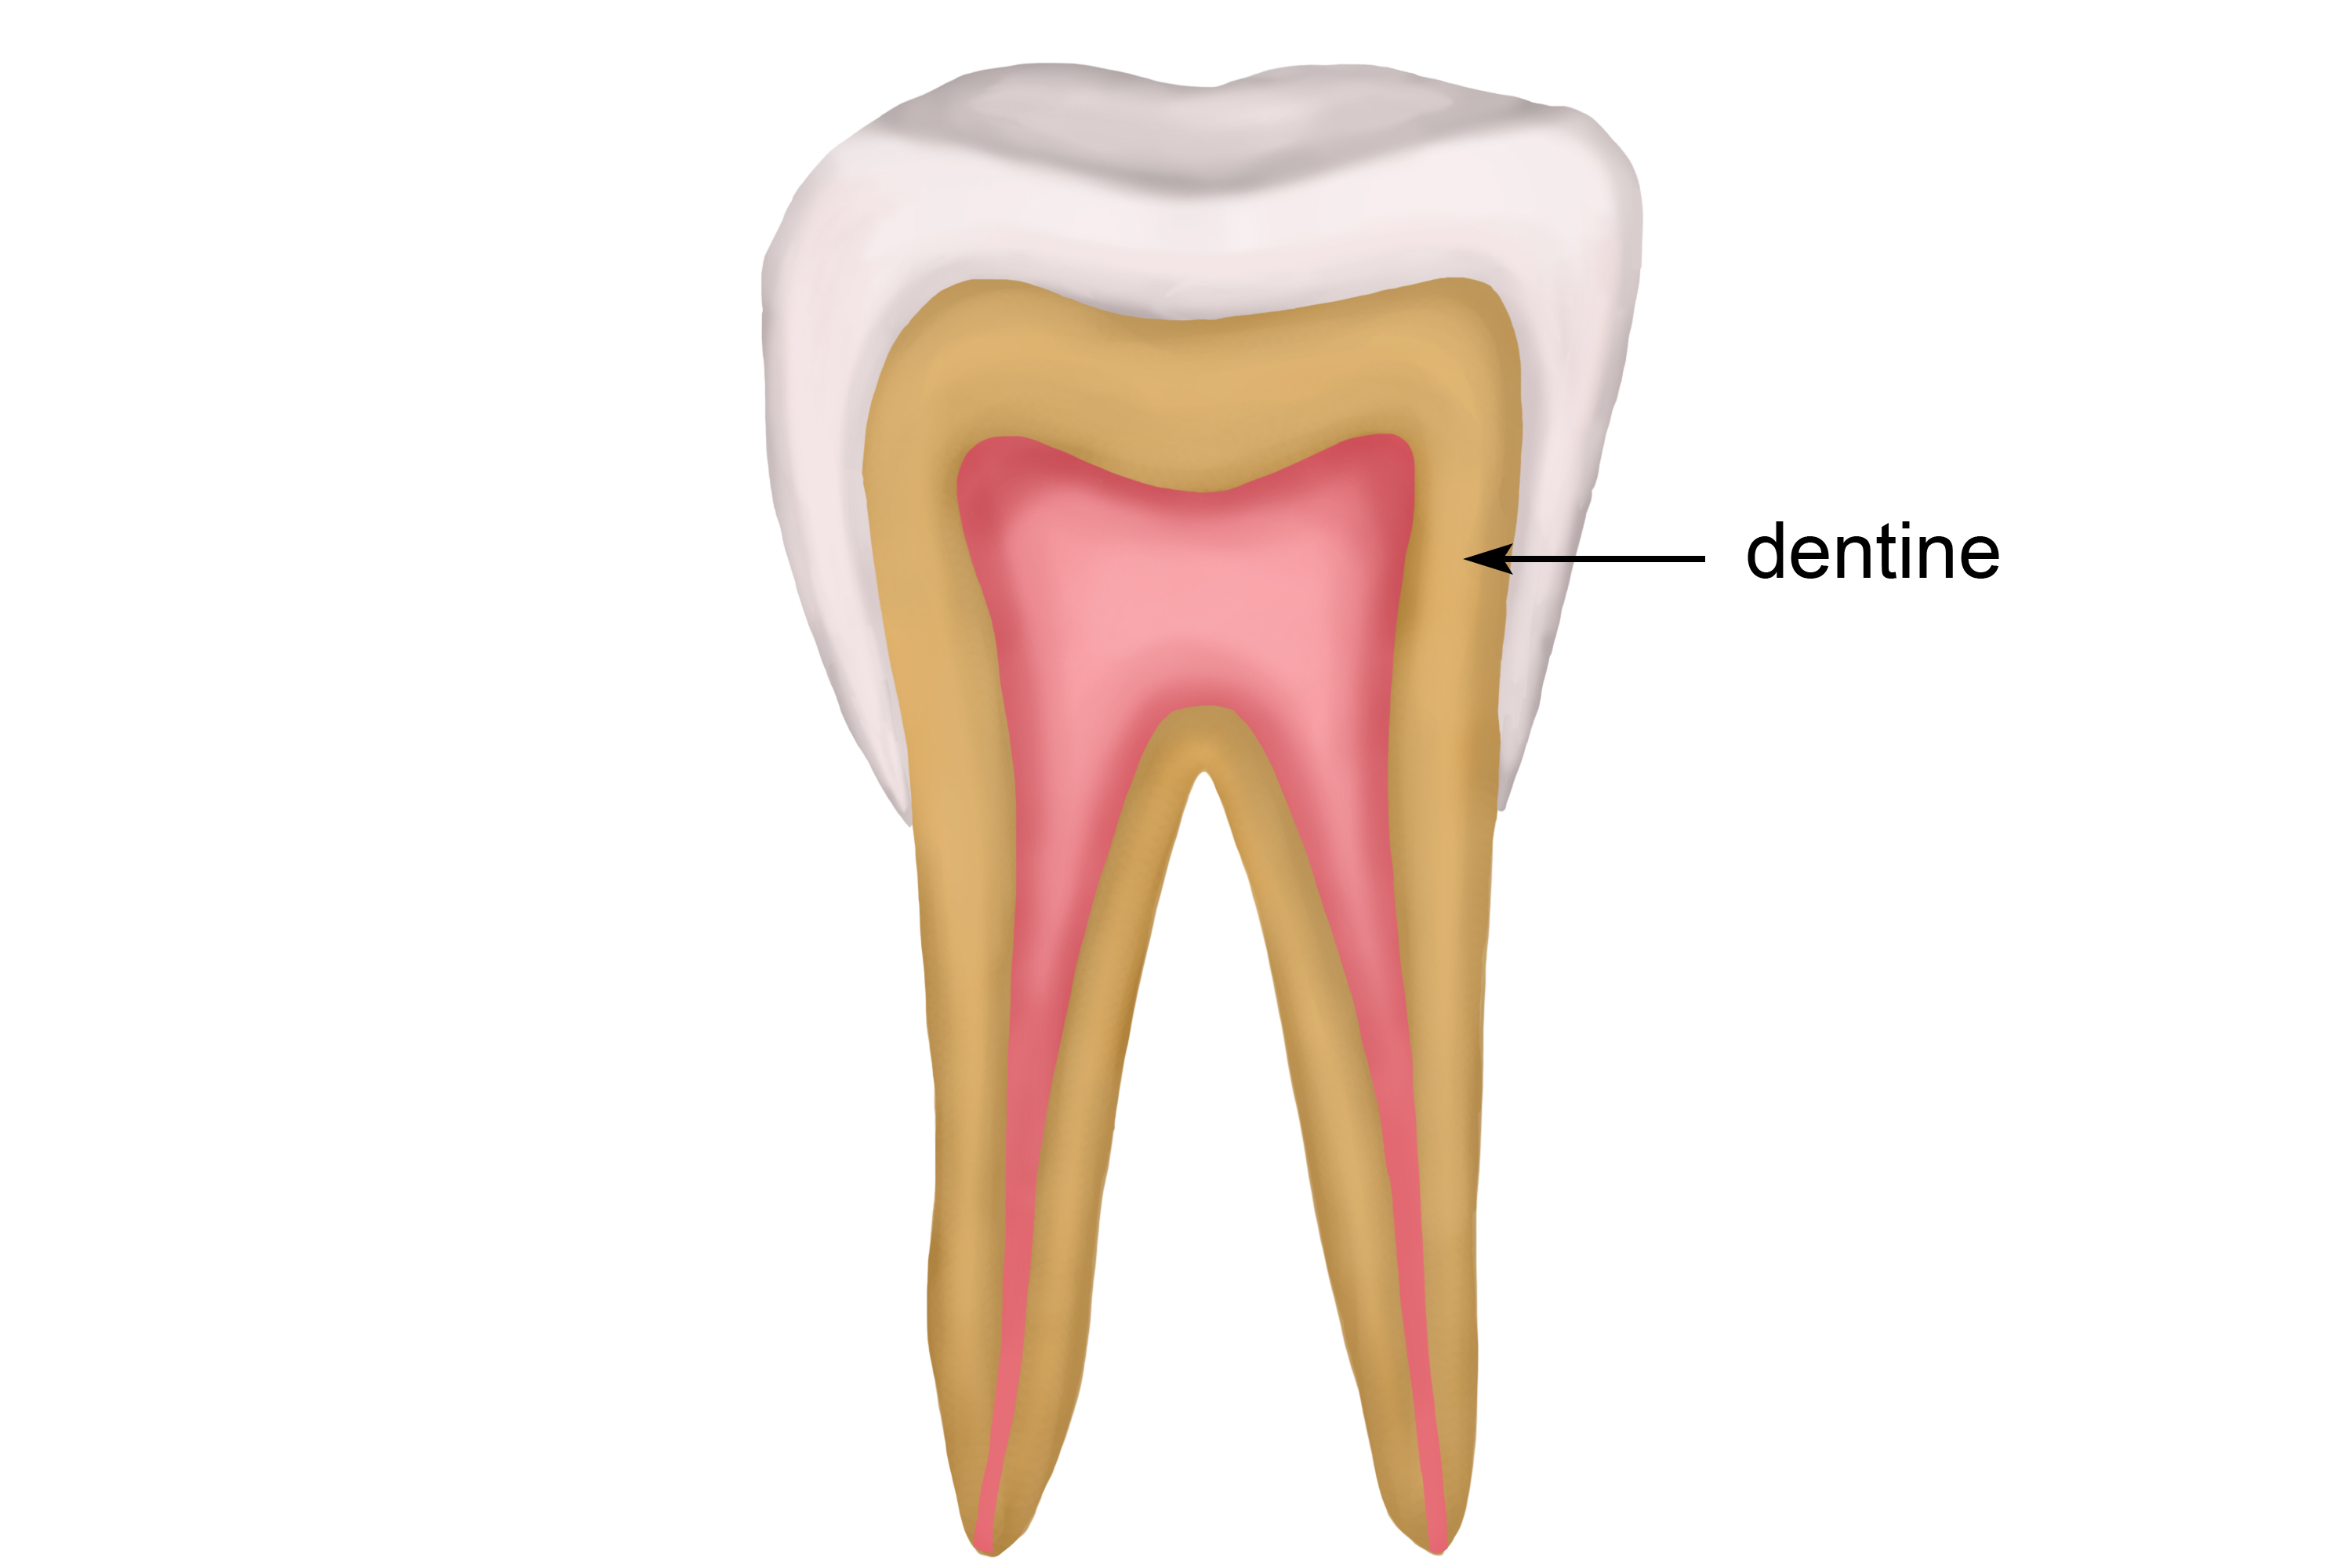 Main structure of the tooth which is harder than bone but softer than enamel